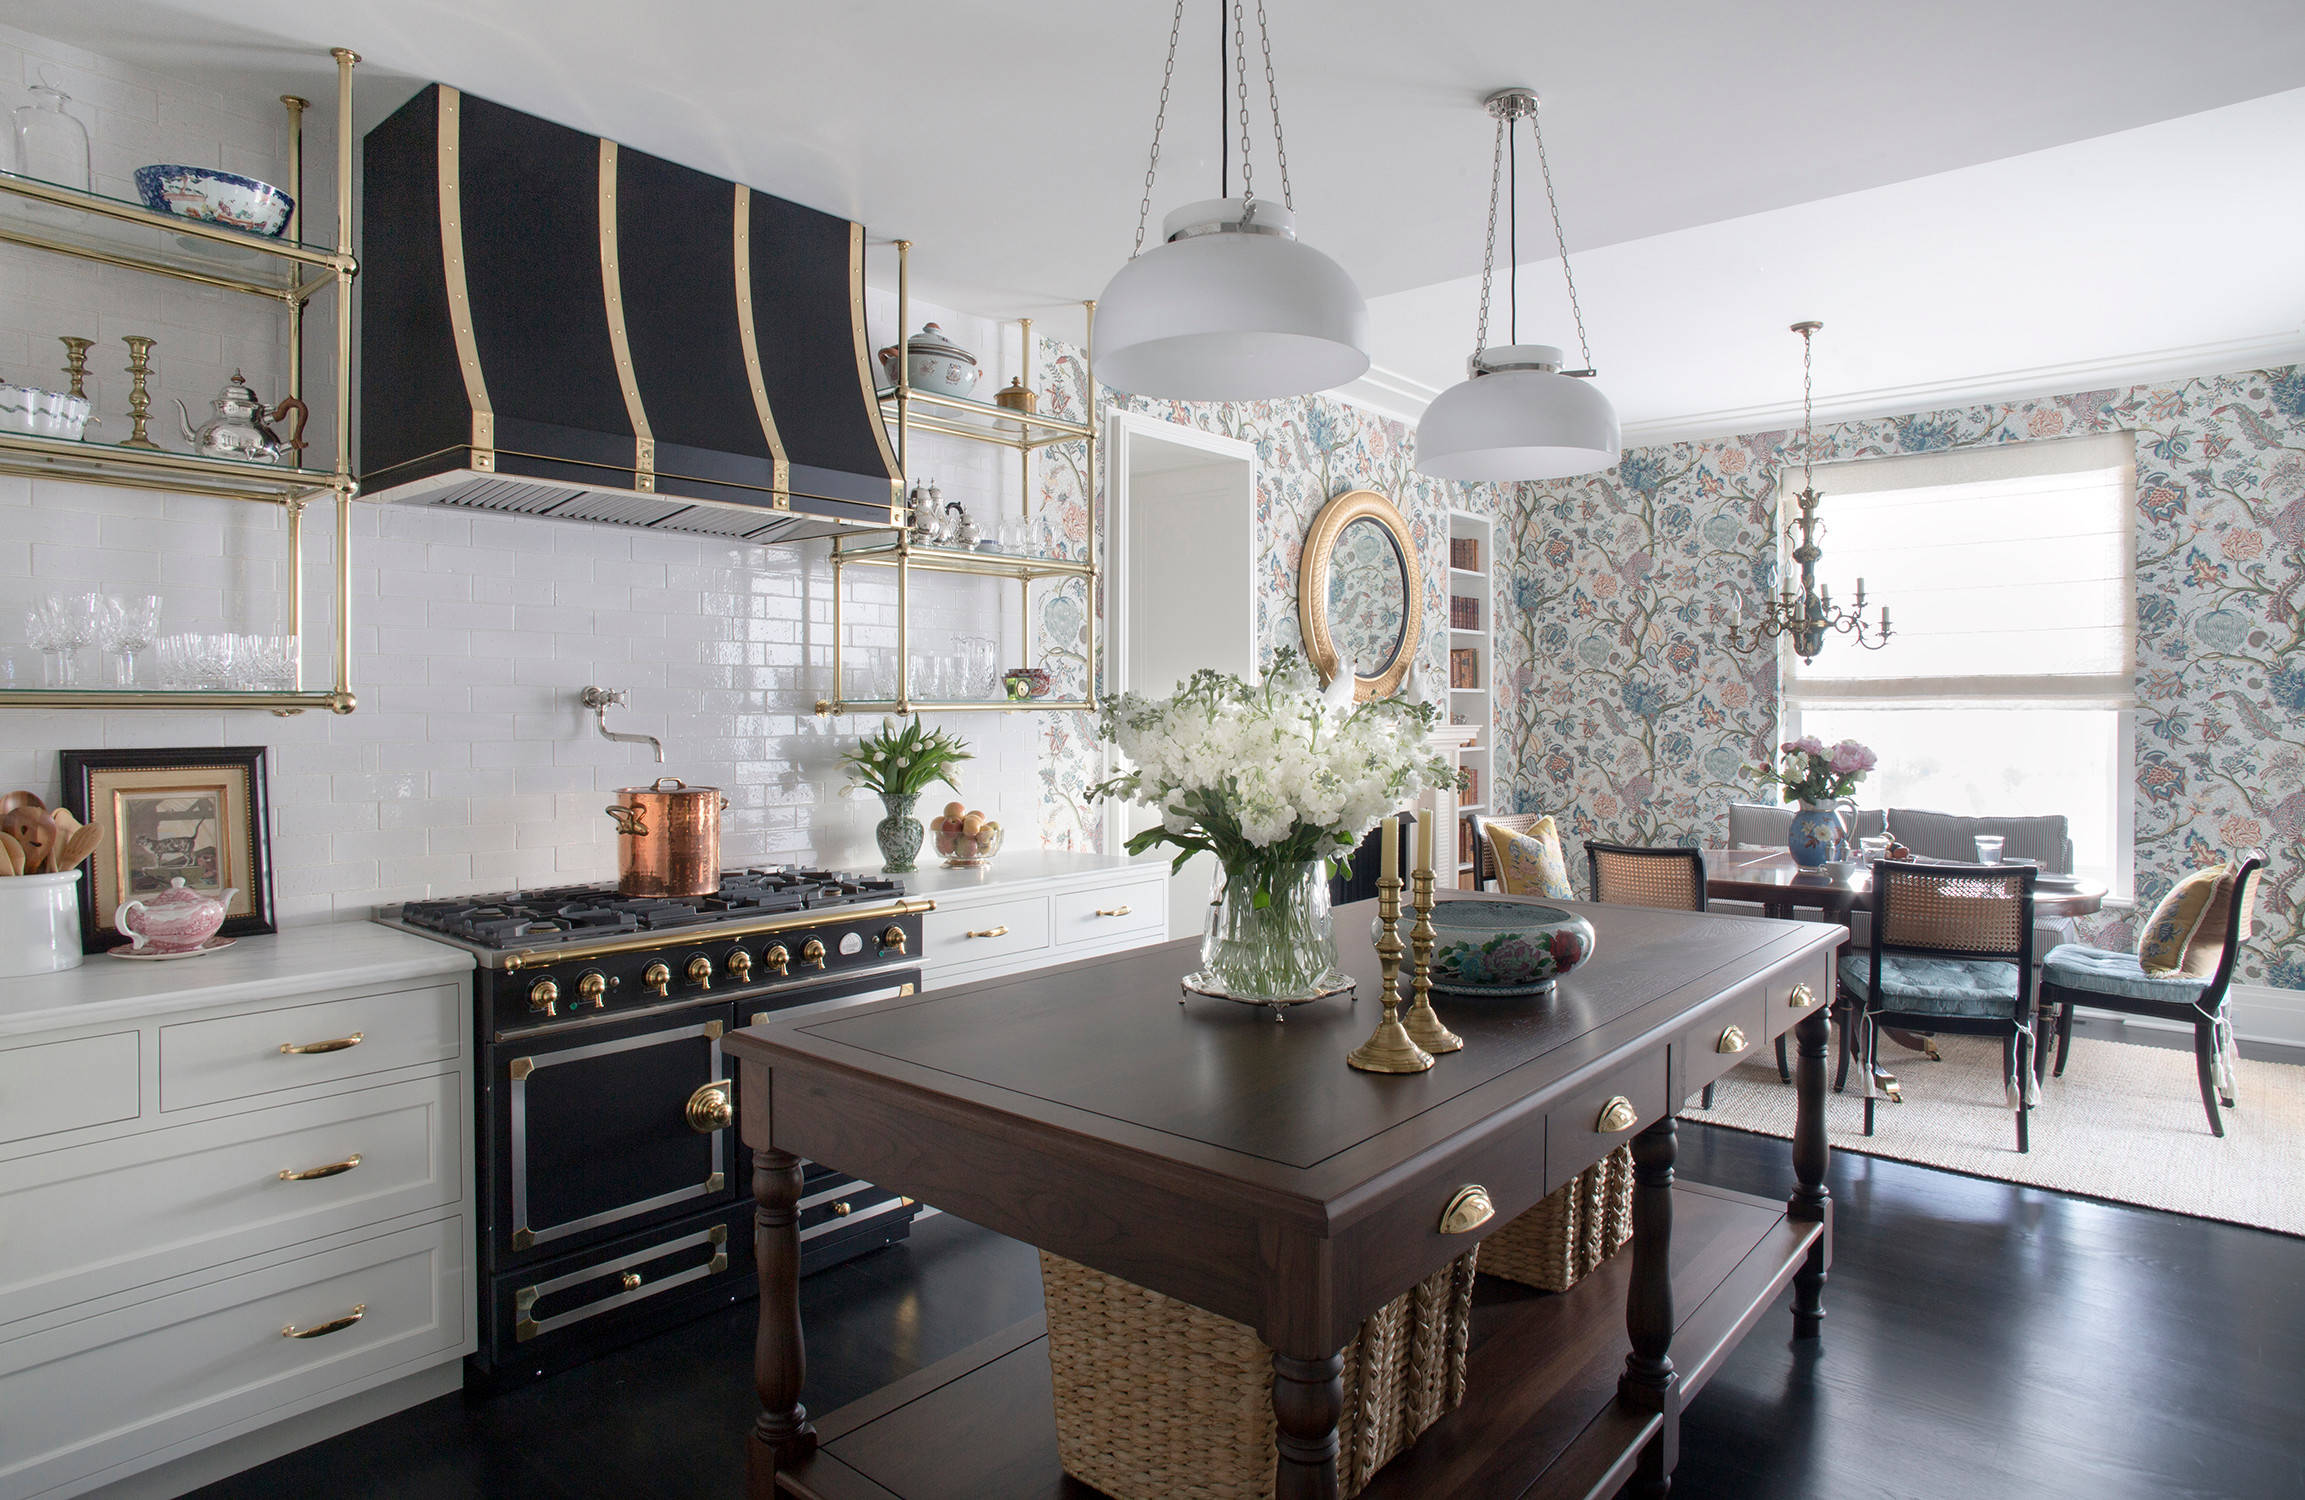 Another great example of a black and white kitchen with silver accessories!